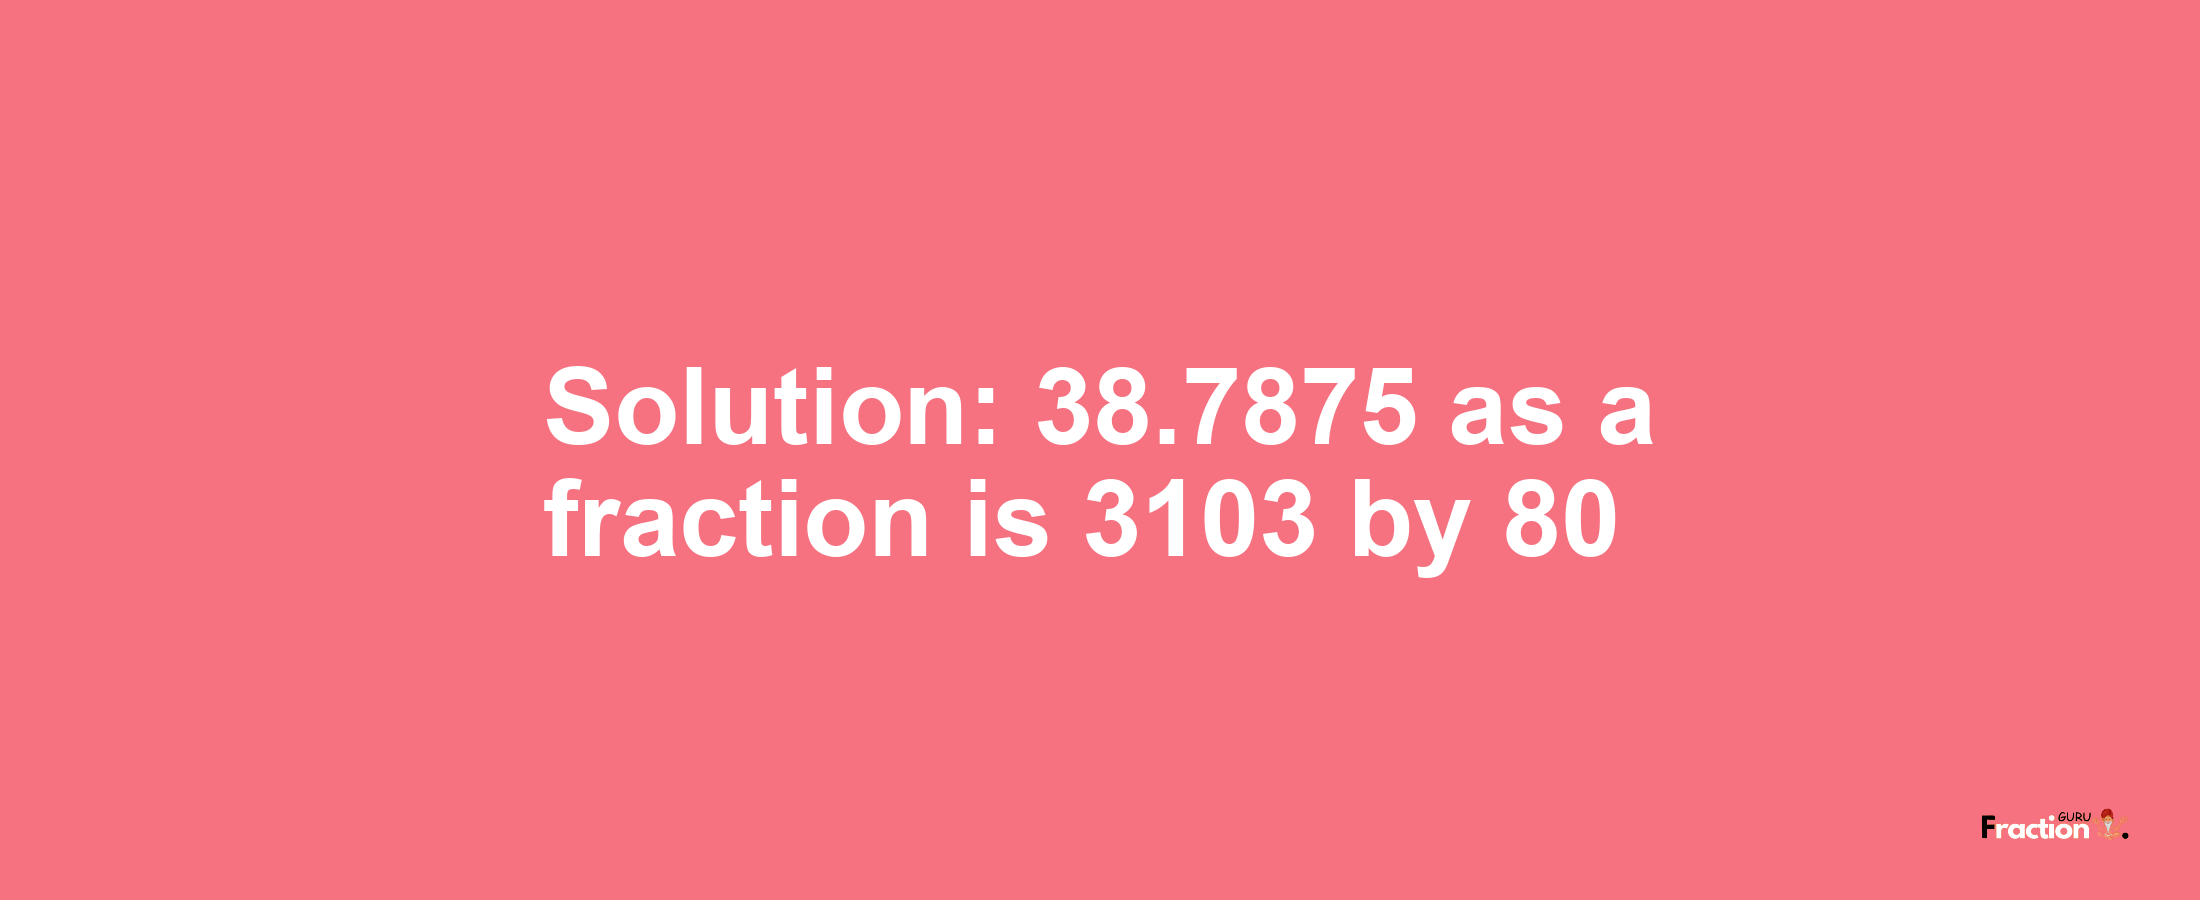 Solution:38.7875 as a fraction is 3103/80